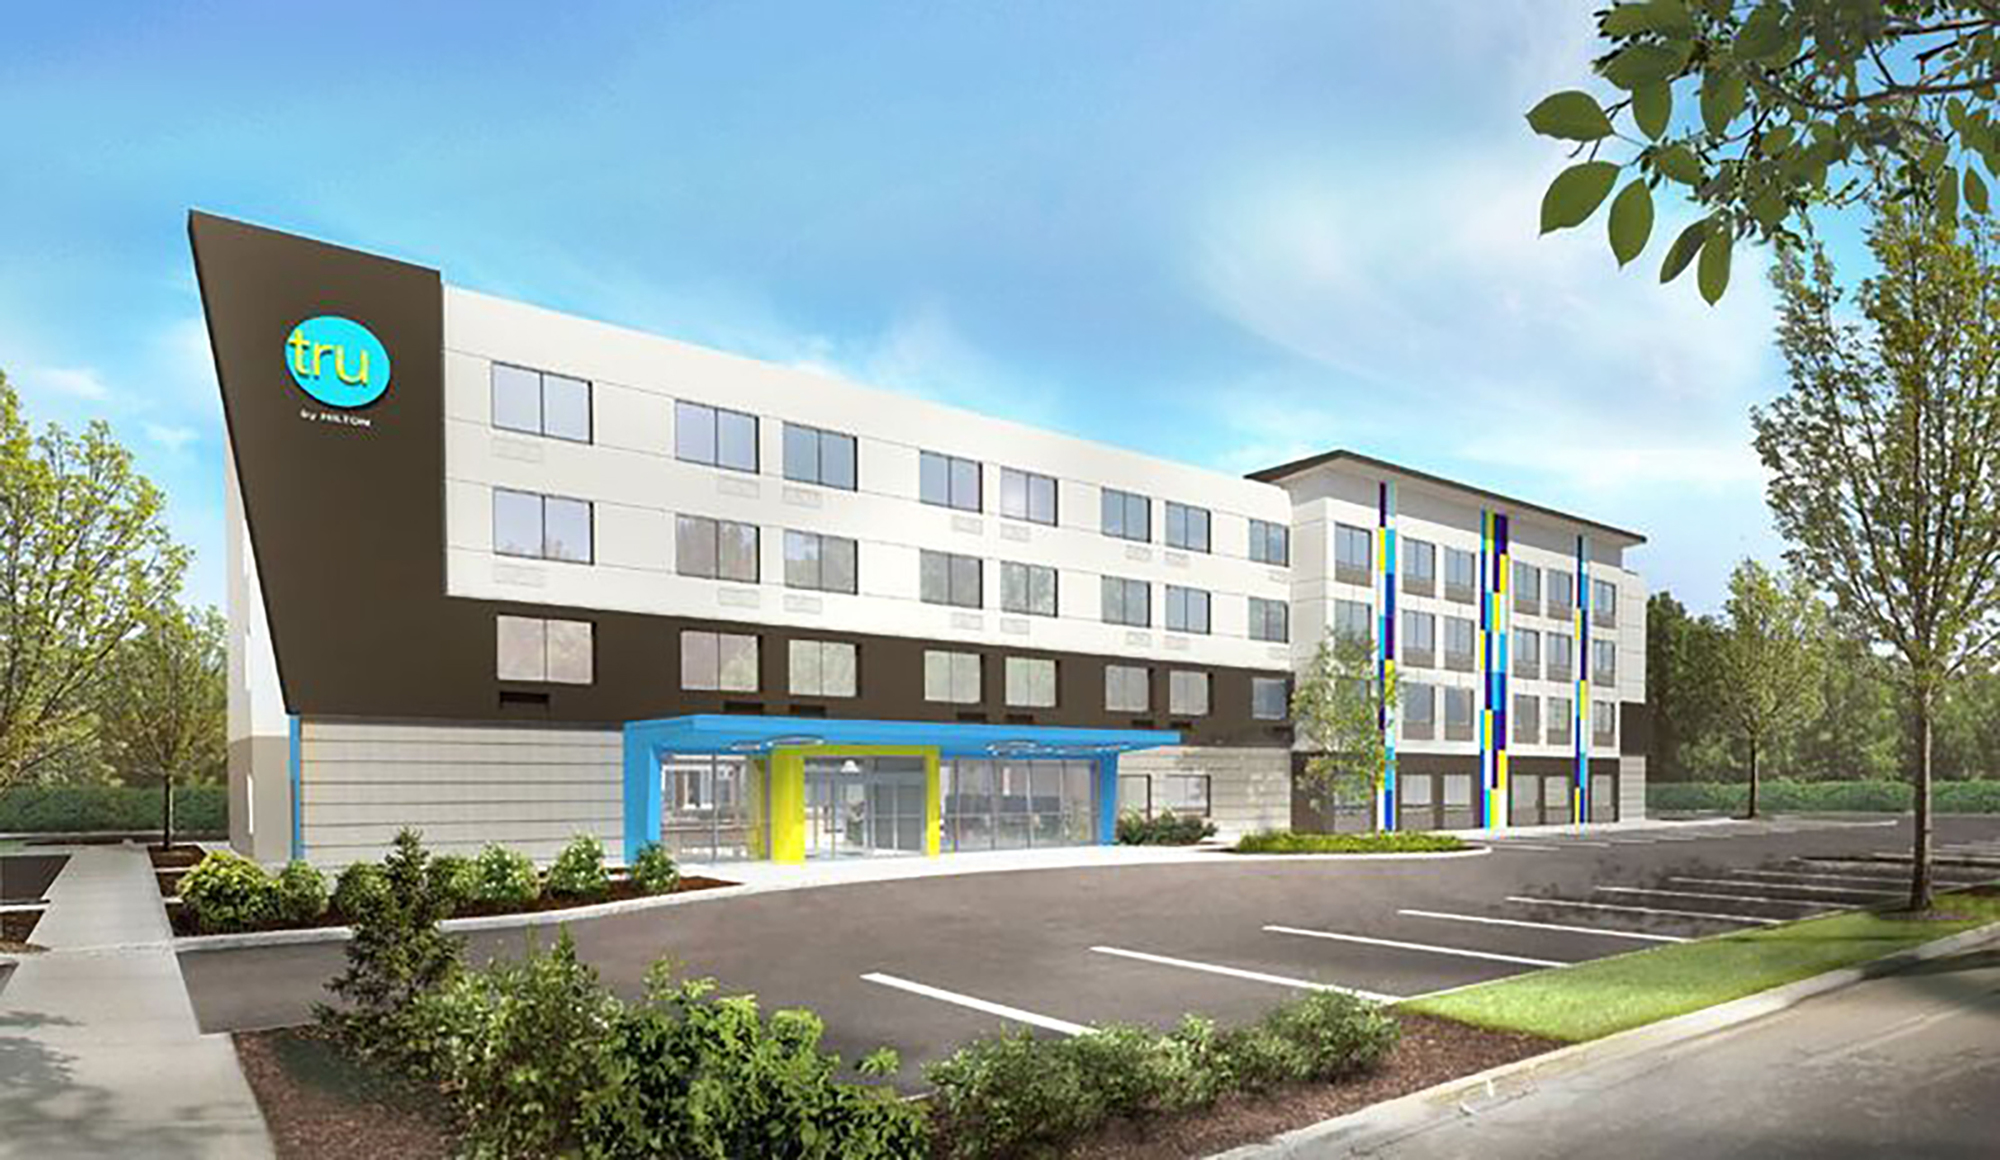 A rendering of Tru by Hilton. A Tru by Hilton is planned at Merrill Road and the Southside Connecter. Another is in development in Town Center Promenade.